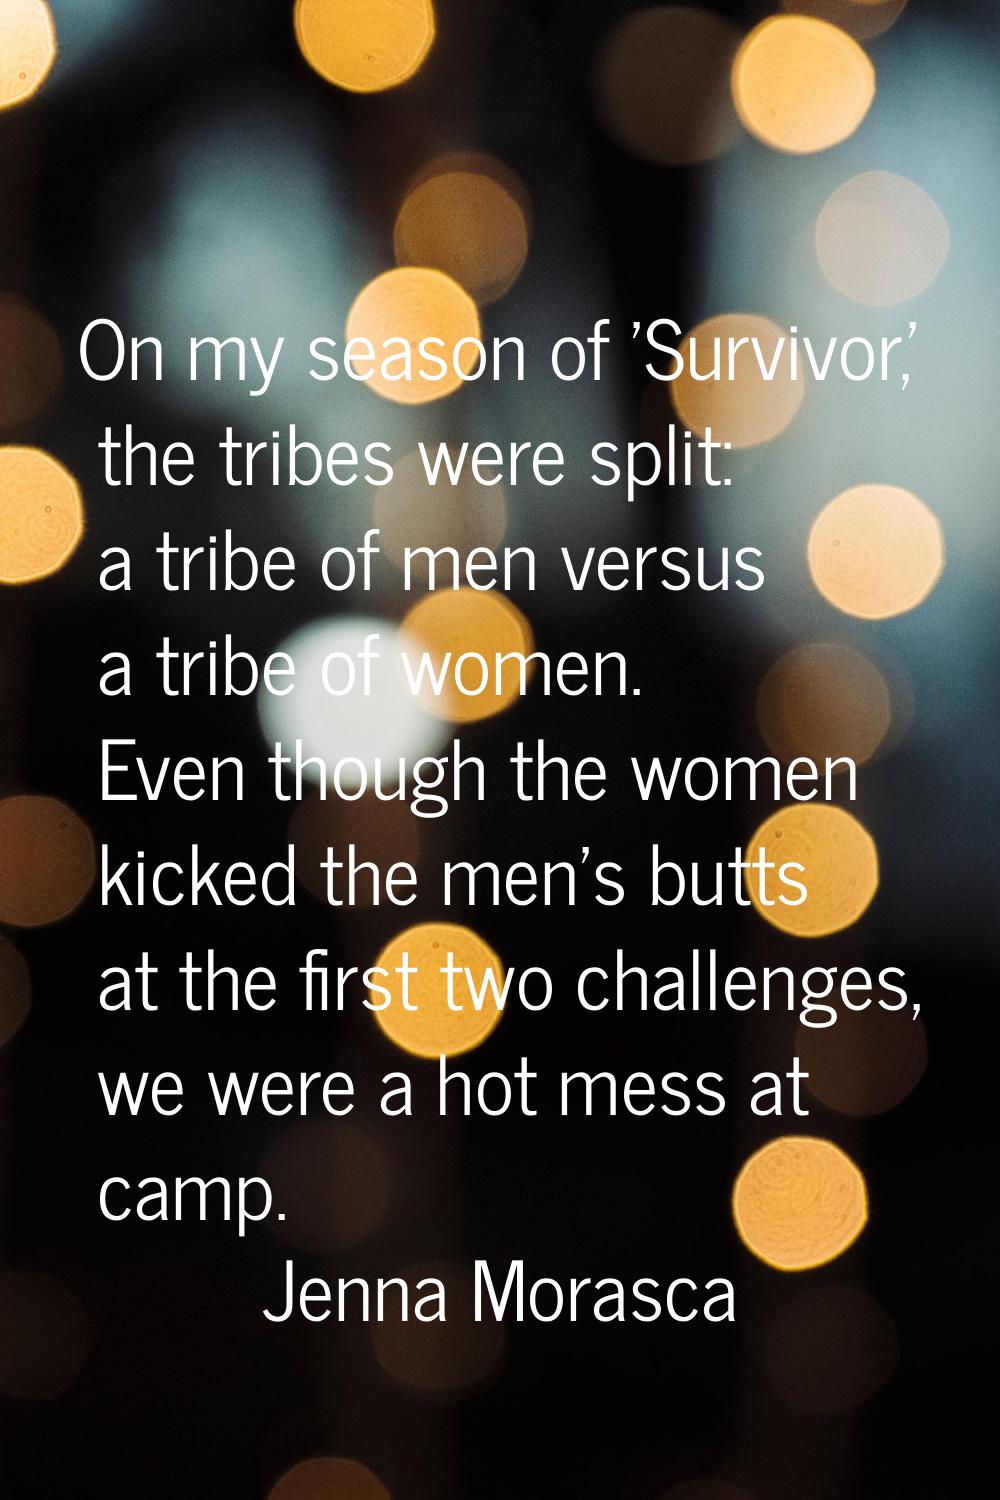 On my season of 'Survivor,' the tribes were split: a tribe of men versus a tribe of women. Even tho